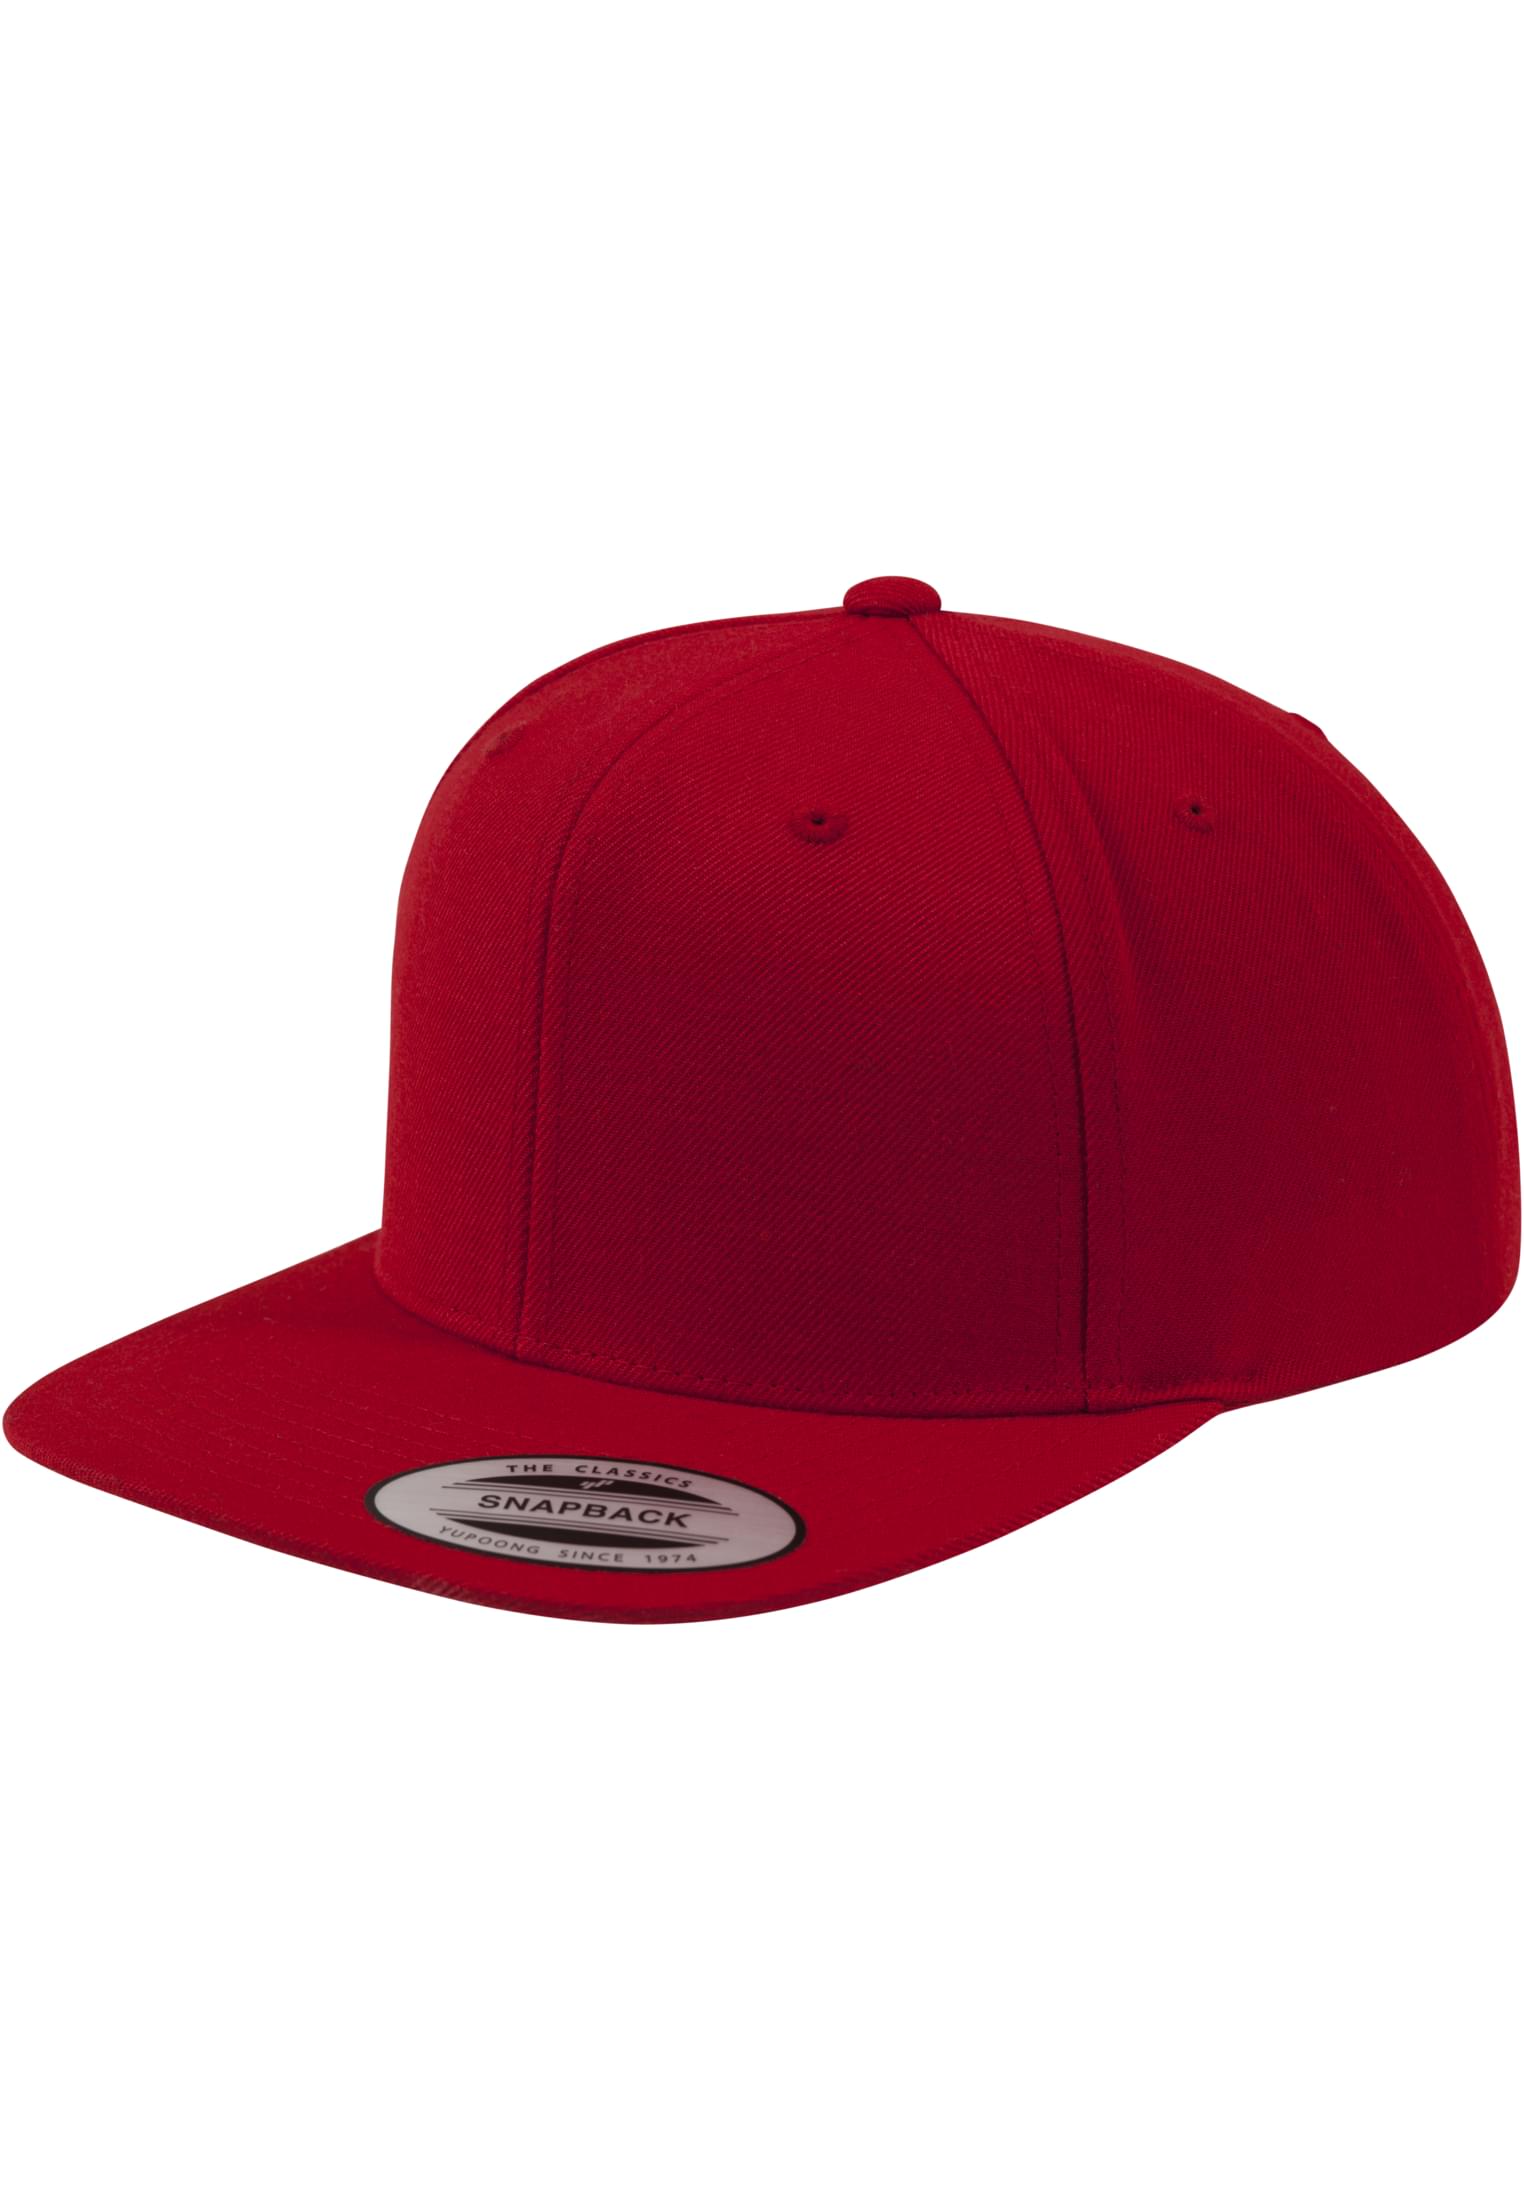 Kids Classic Snapback in Farbe red/red